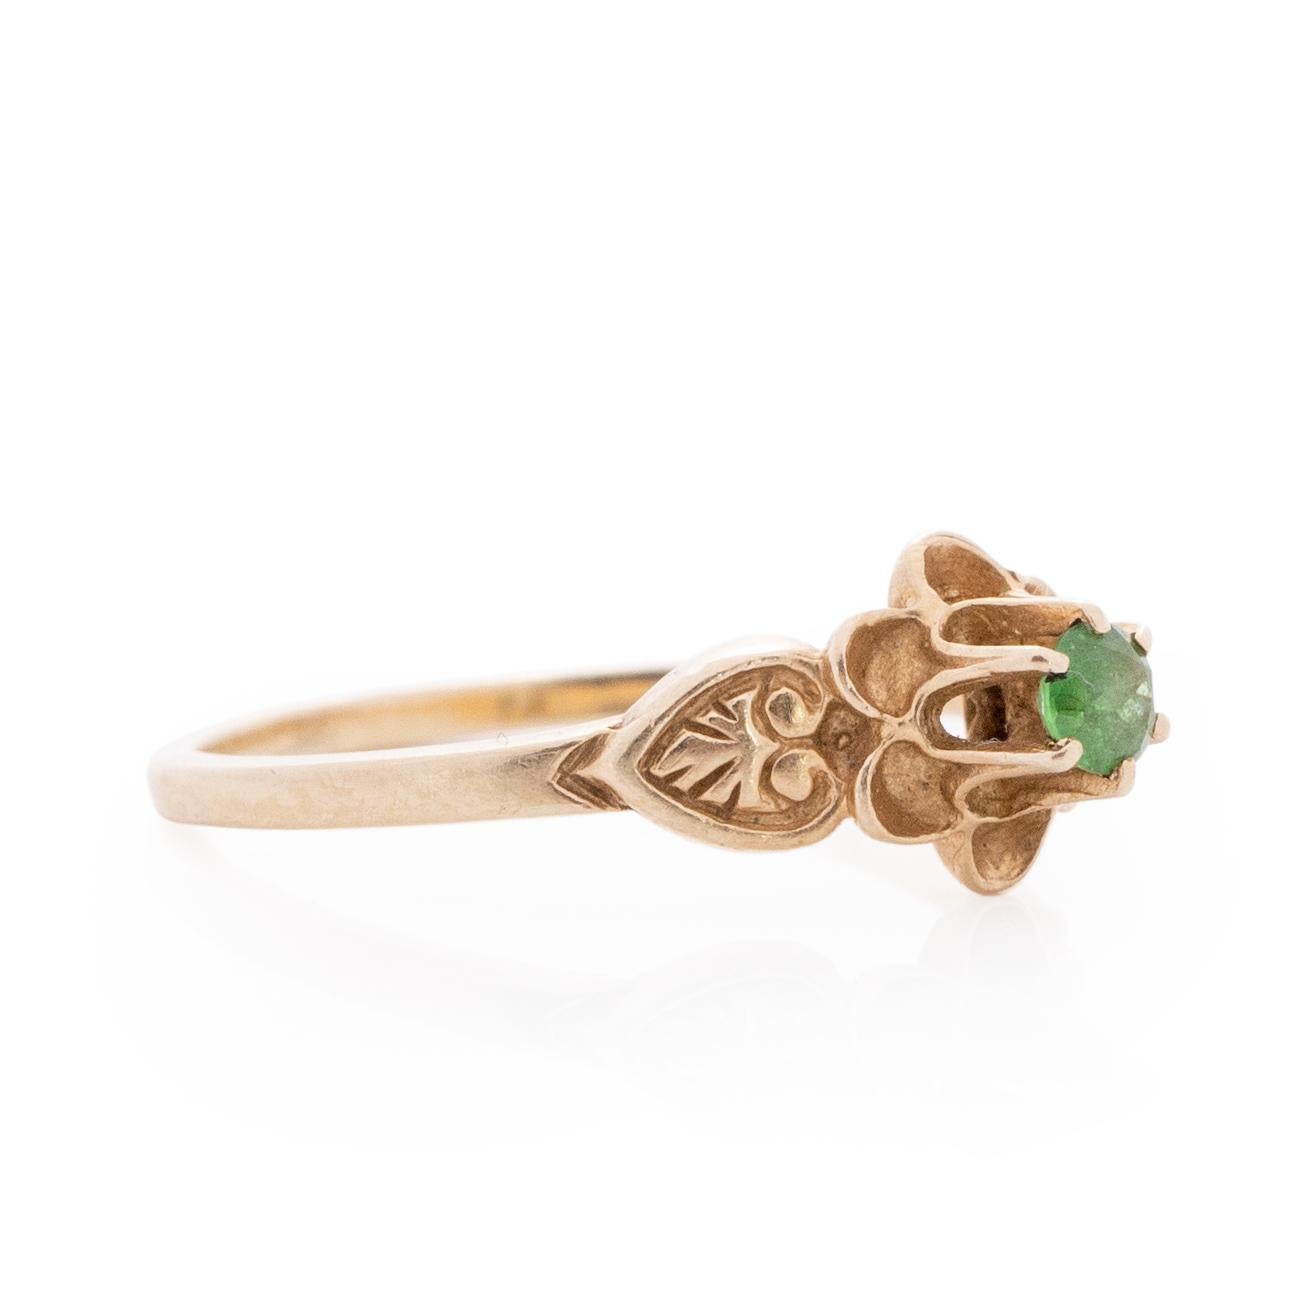 Here we have a elegant Art Deco Solitaire flower Emerald ring. The emerald solitaire is held by 6 sharp talon prongs, set in a beautiful flower design. Along the shanks are clean and crisp leaf carvings tying the whole floral theme together. This